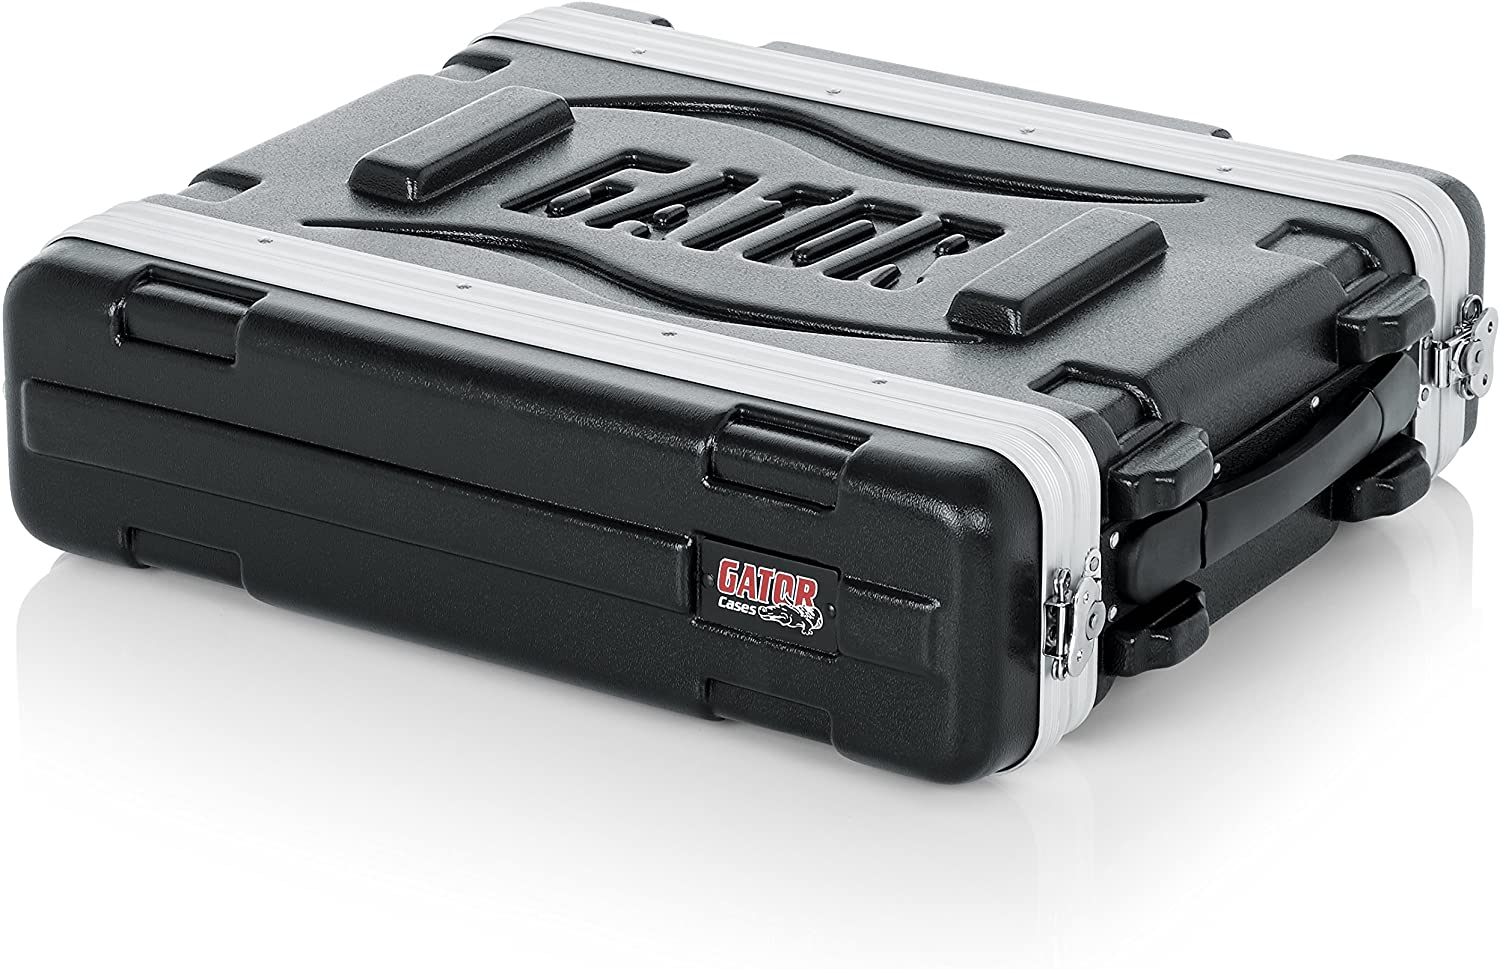 Gator Cases Lightweight Molded 2U Rack Case with Heavy Duty Latches; Shallow 14.25" depth  - GR-2S - Pro-Distributing